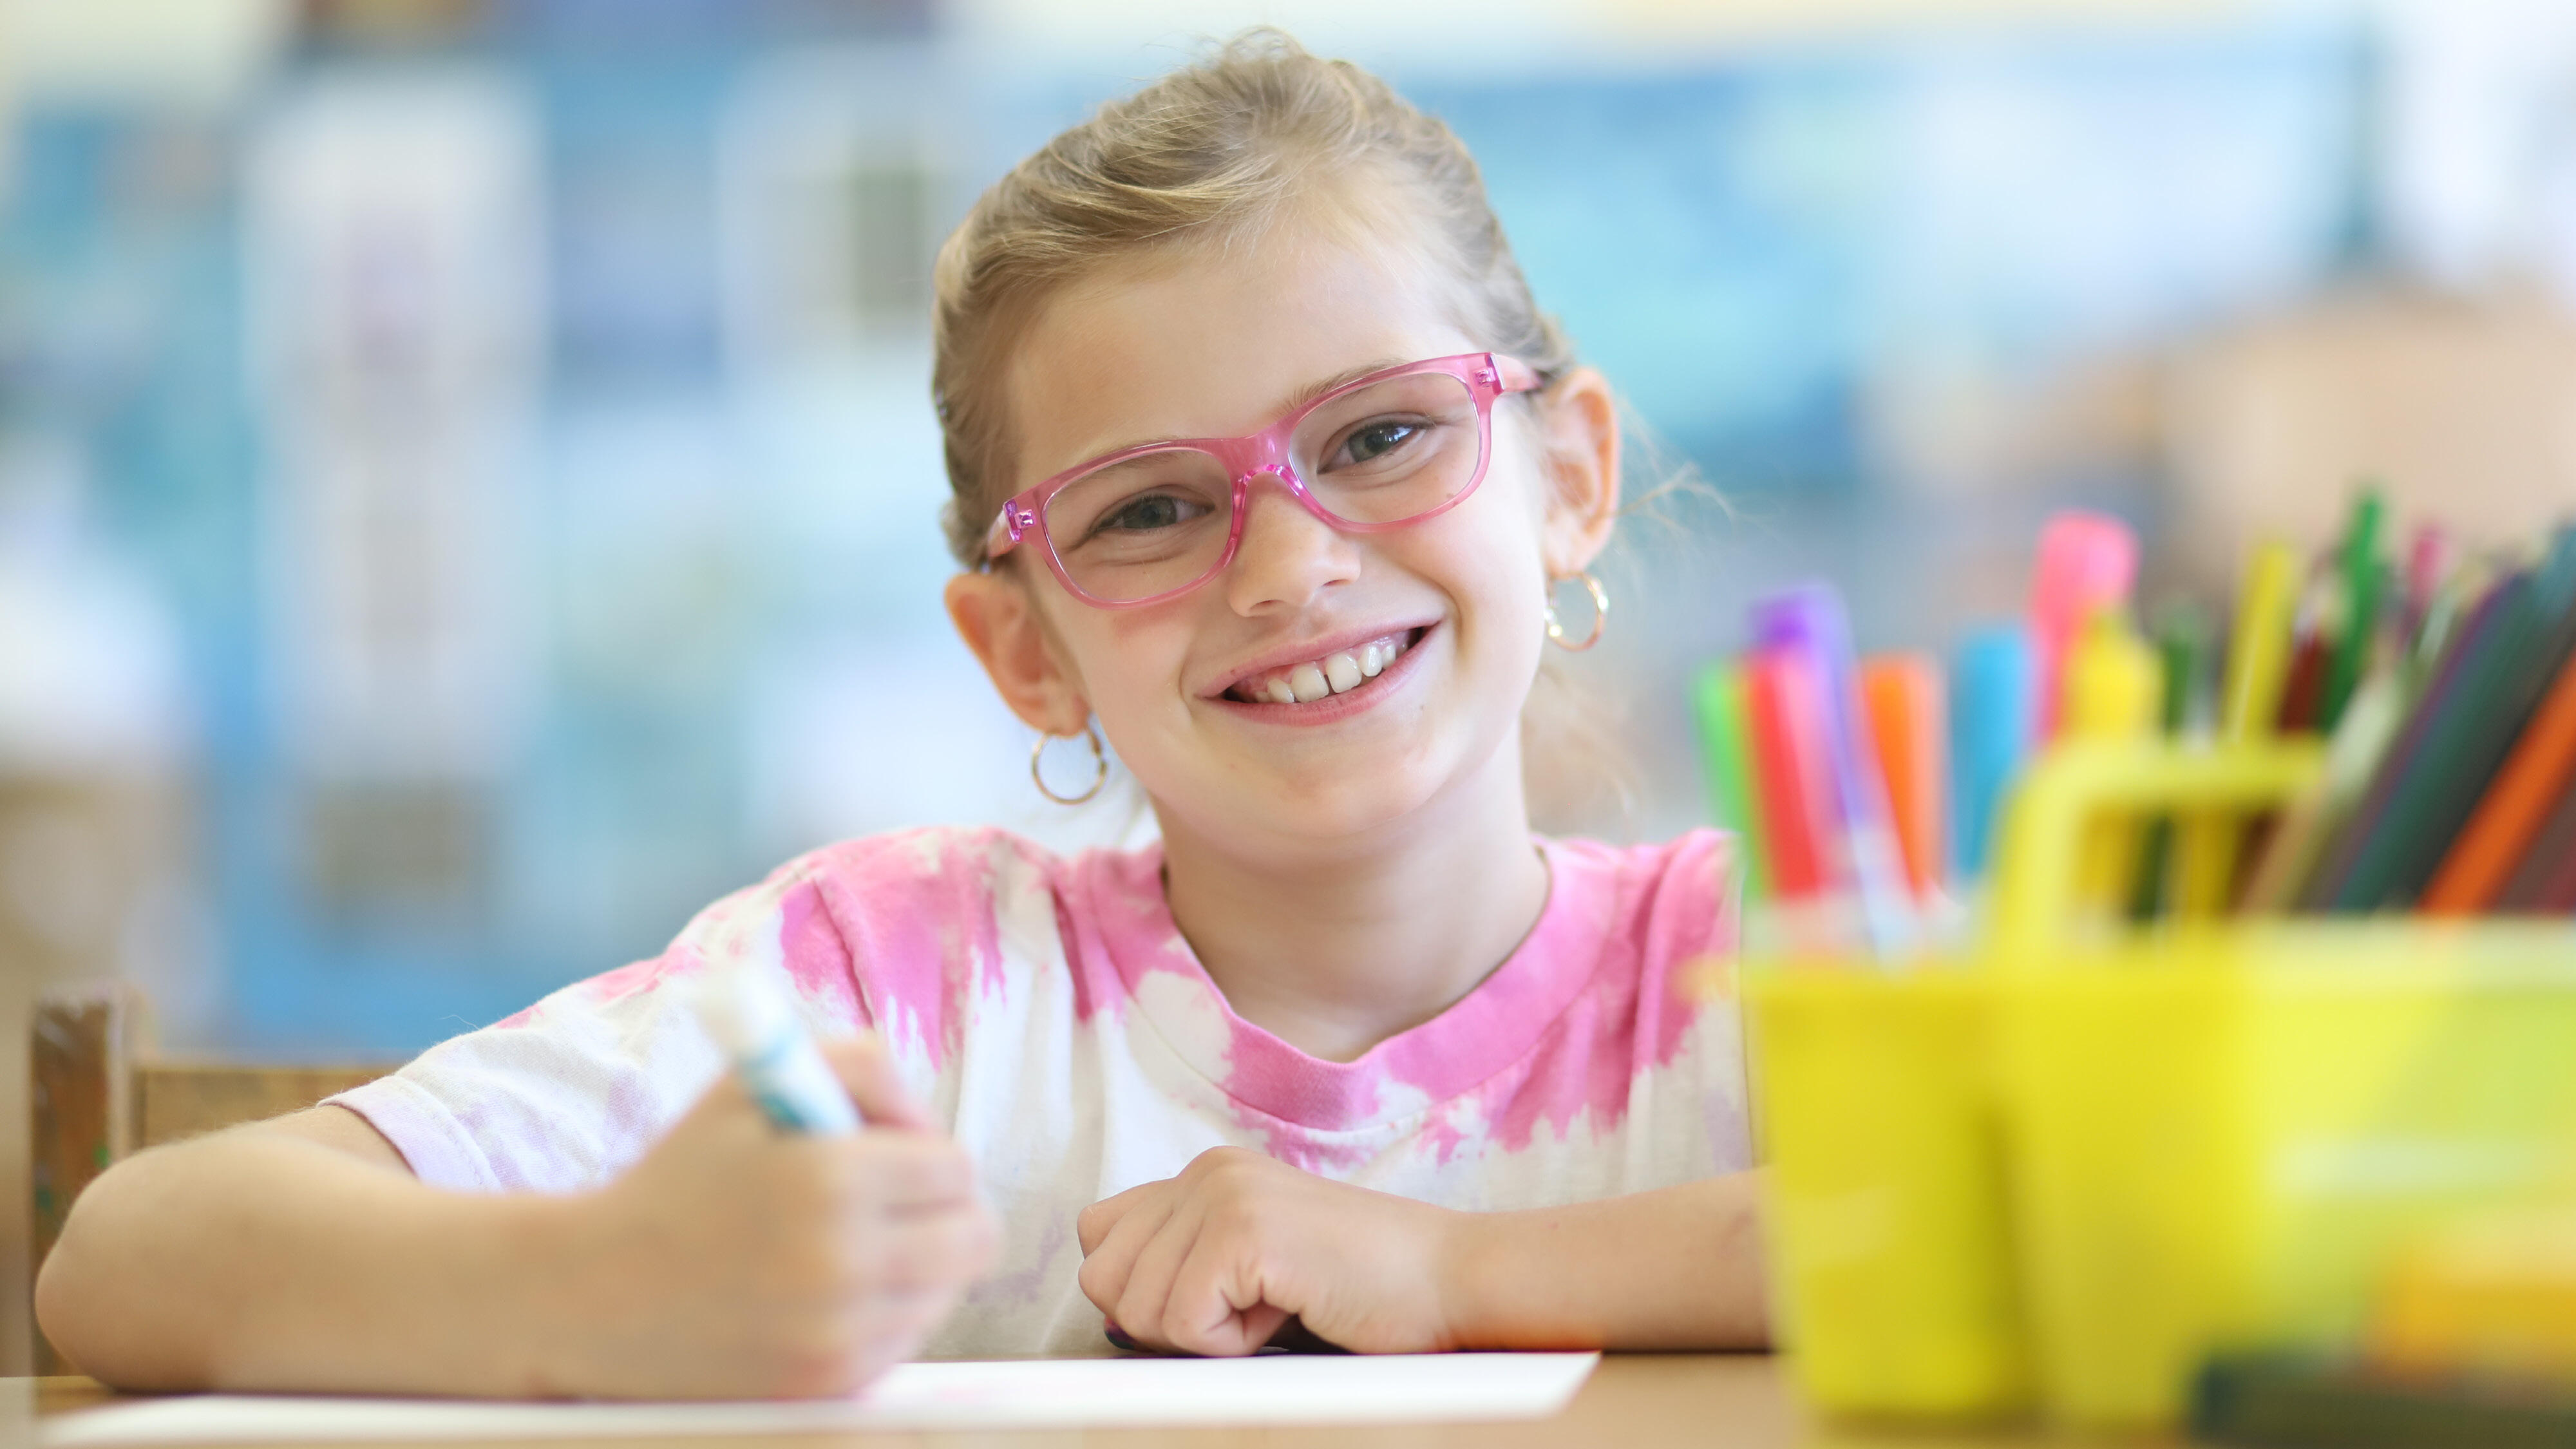 Student smiling while drawing with markers